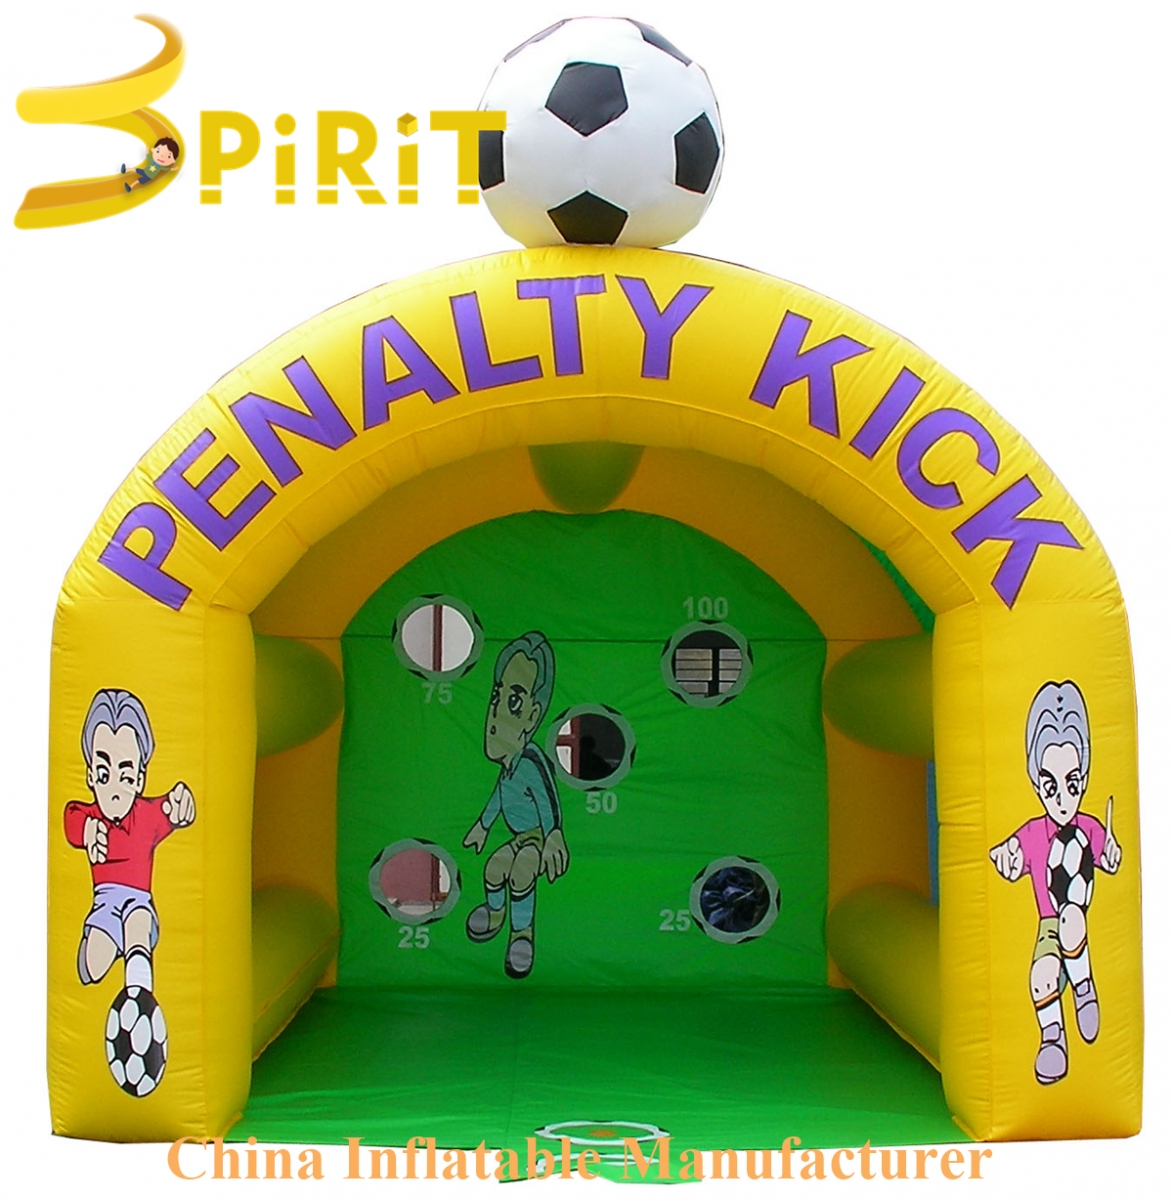 Soccer outdoor party inflatable games for sale-SPIRIT PLAY,Outdoor Playground, Indoor Playground,Trampoline Park,Outdoor Fitness,Inflatable,Soft Playground,Ninja Warrior,Trampoline Park,Playground Structure,Play Structure,Outdoor Fitness,Water Park,Play System,Freestanding,Interactive,independente ,Inklusibo, Park, Pagsaka sa Bungbong, Dula sa Bata